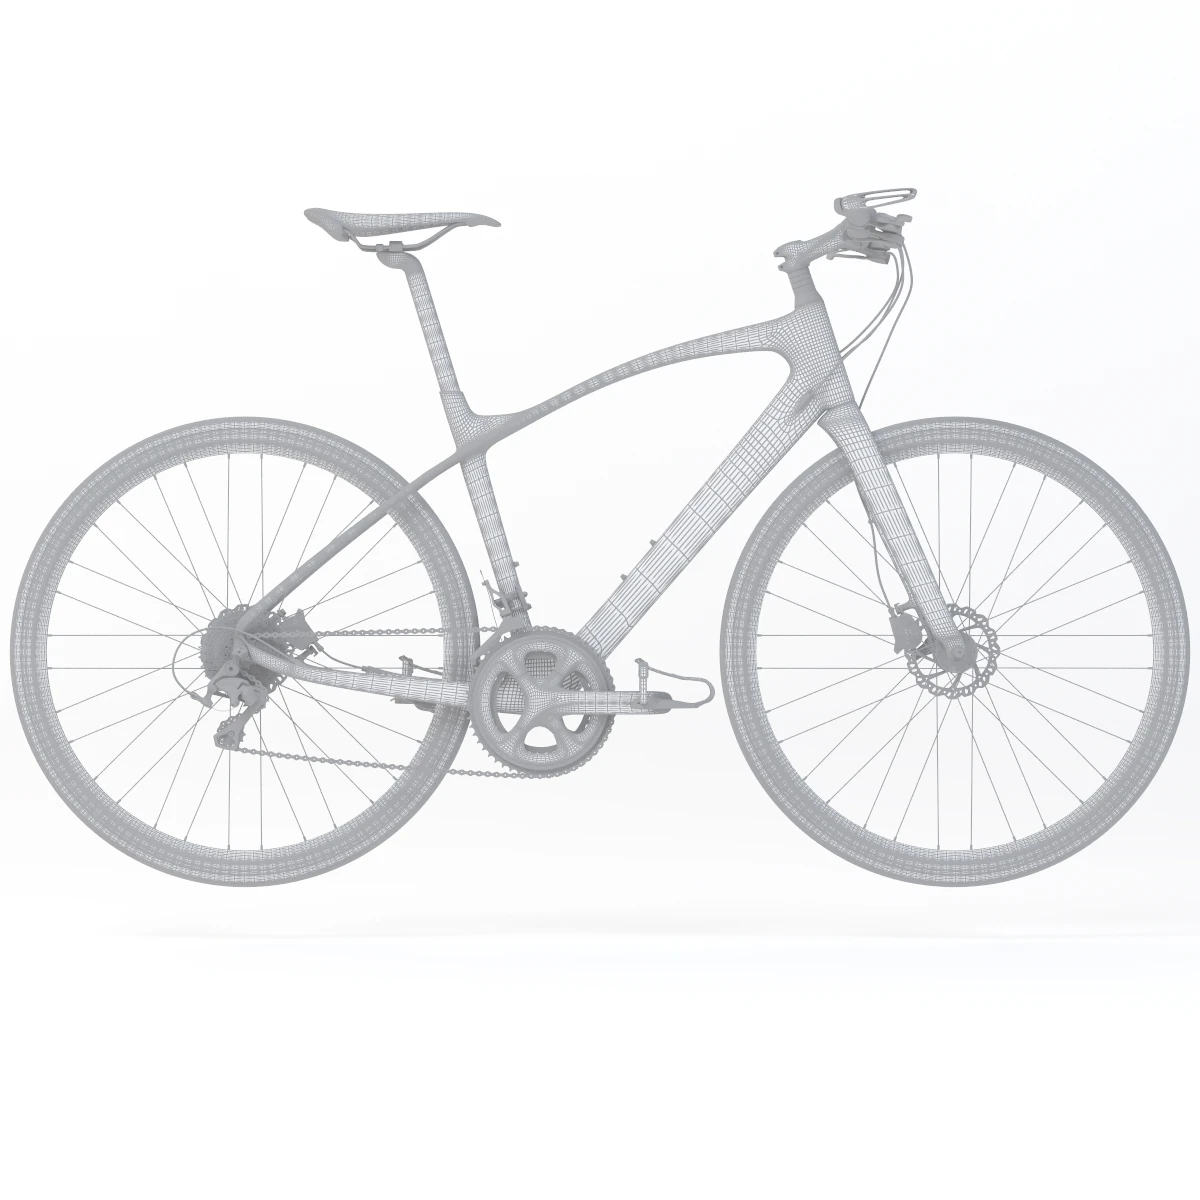 Giant Fastroad Cm1 Black Bicycle 3D Model_020